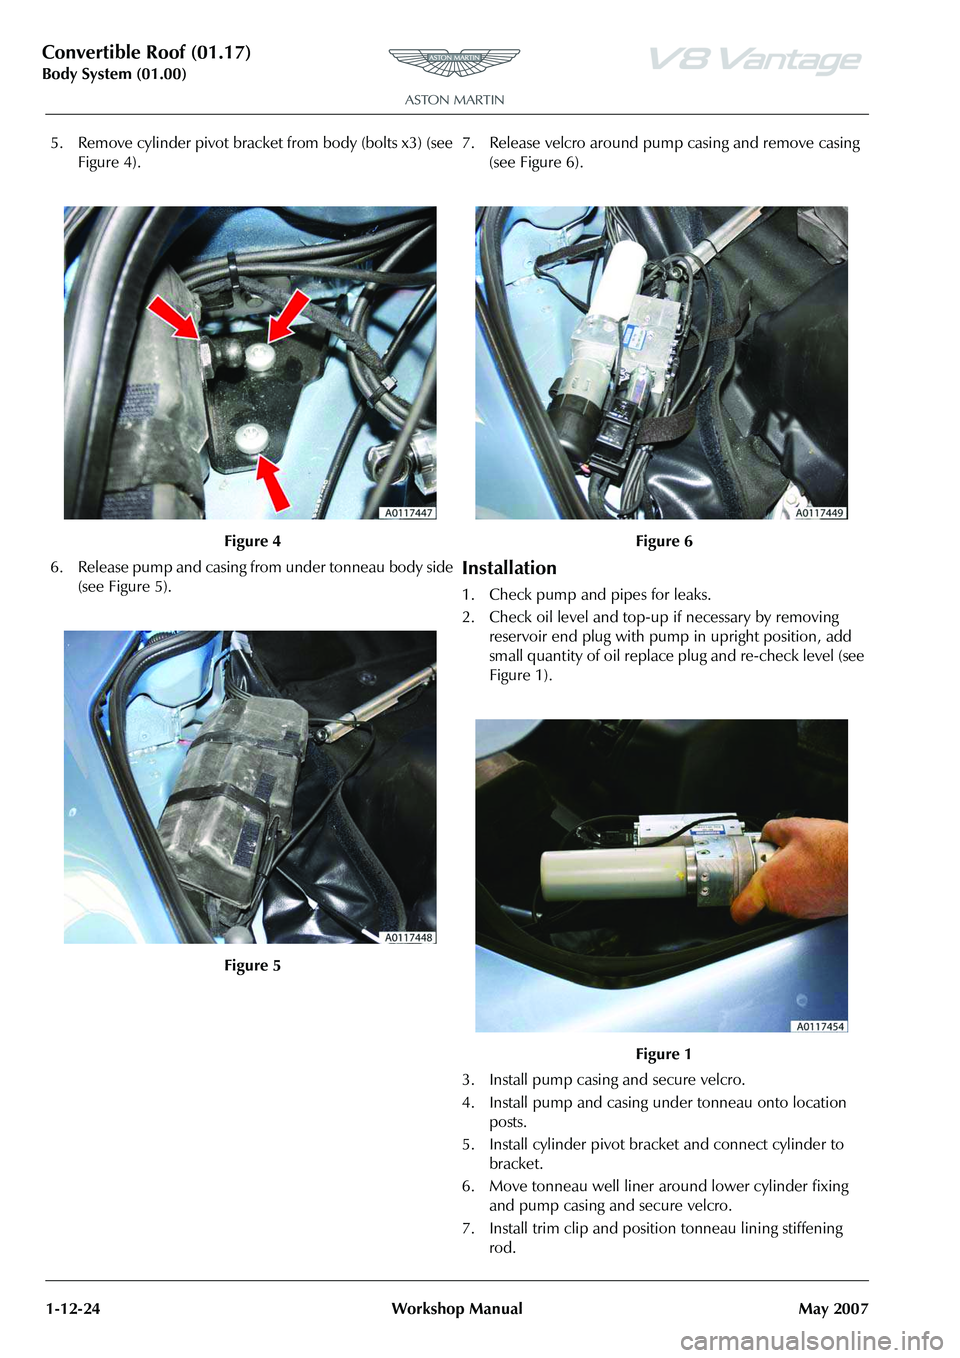 ASTON MARTIN V8 VANTAGE 2010  Workshop Manual Convertible Roof (01.17)
Body System (01.00)1-12-24 Workshop Manual May 2007
5. Remove cylinder pivot bracket from body (bolts x3) (see  Figure 4).
6. Release pump and casing from under tonneau body s